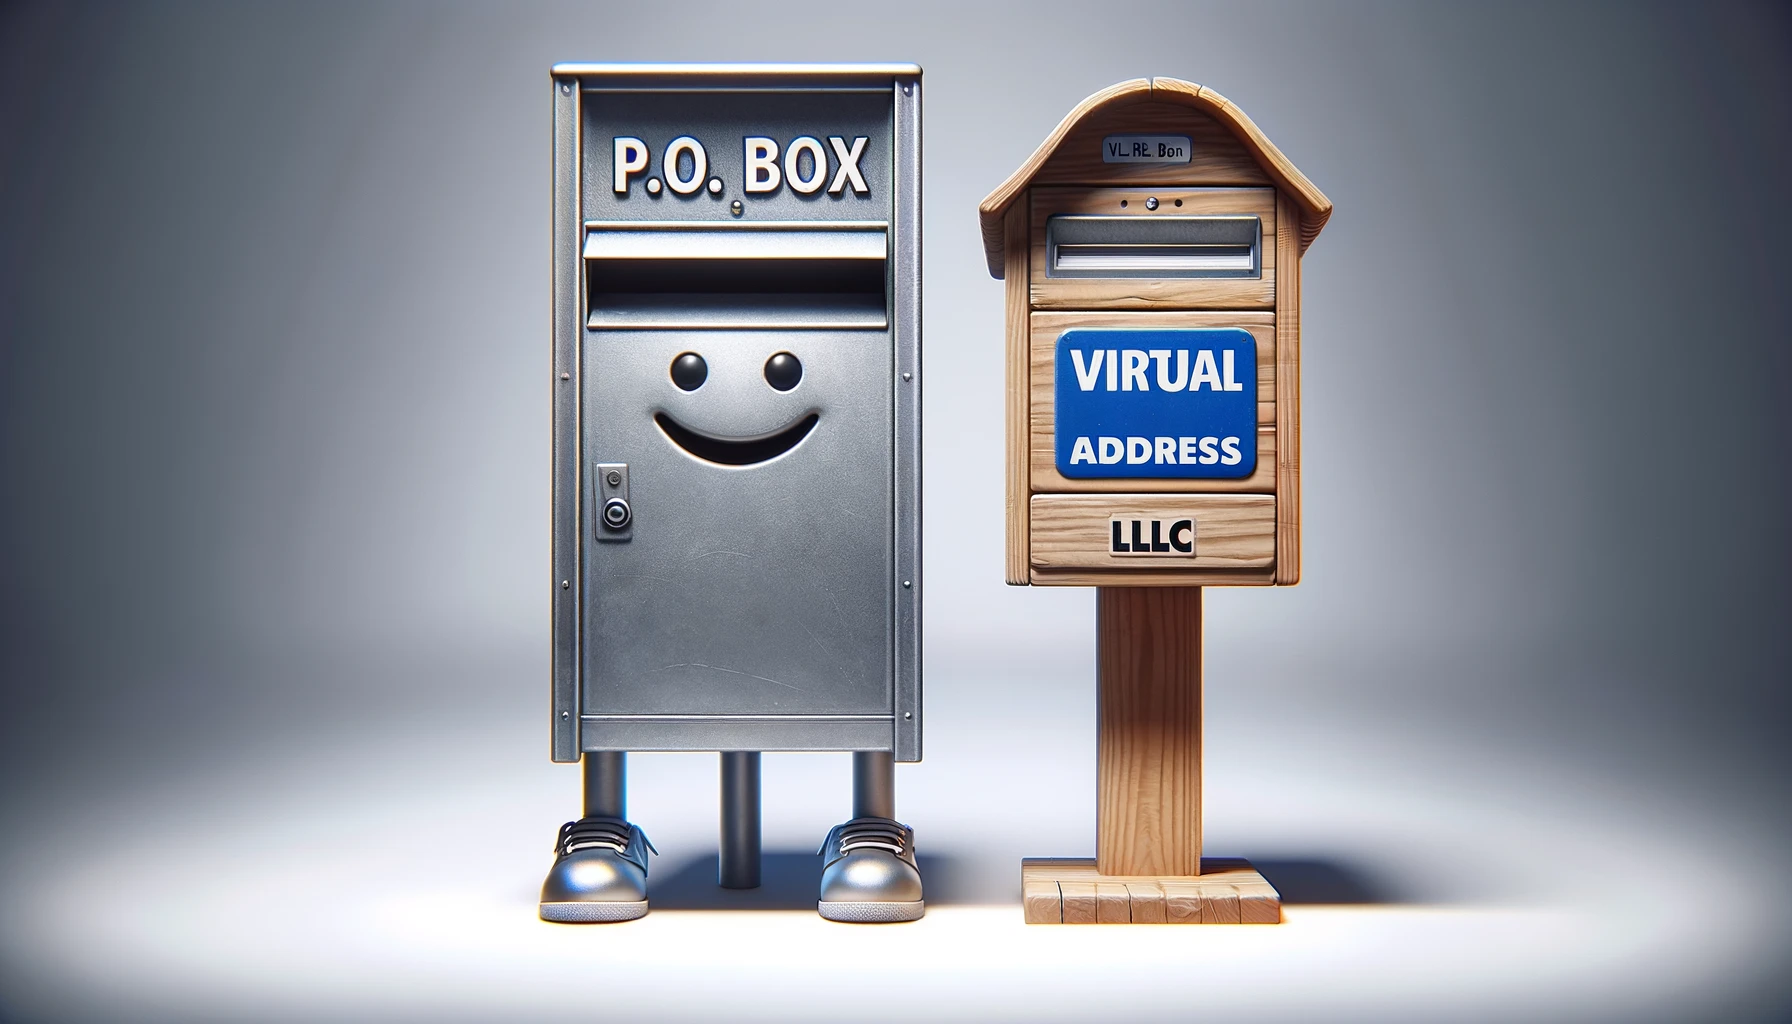 llc virtual address for business mail instead of physical street address 